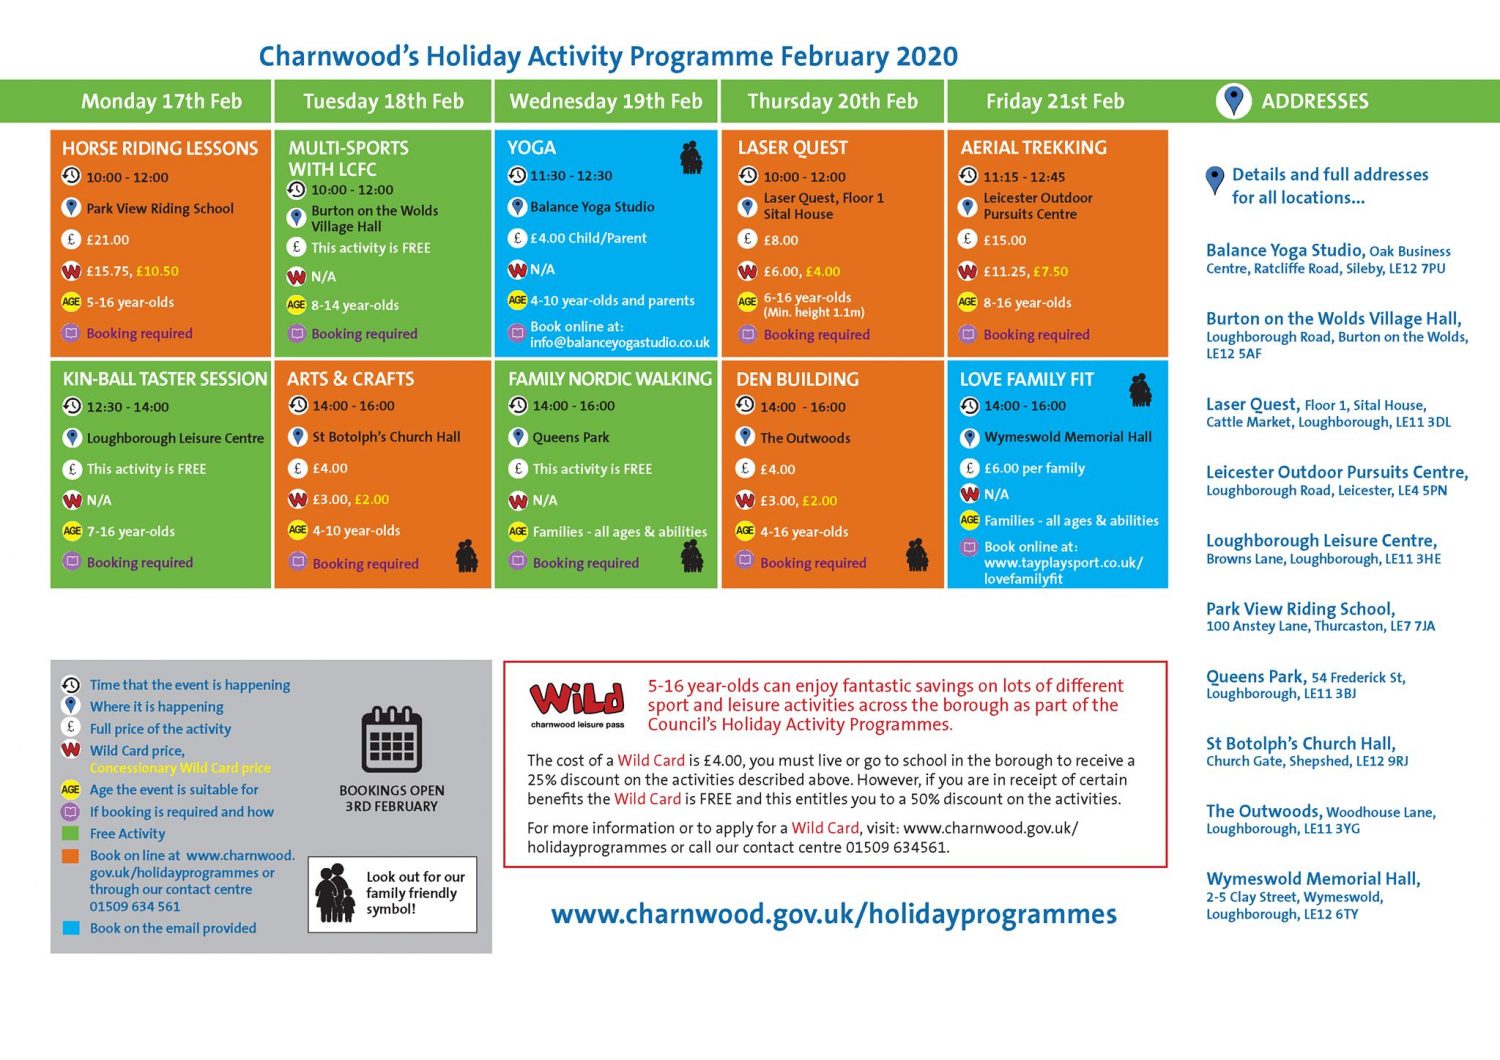 Check out the February Half Term Activity Programme